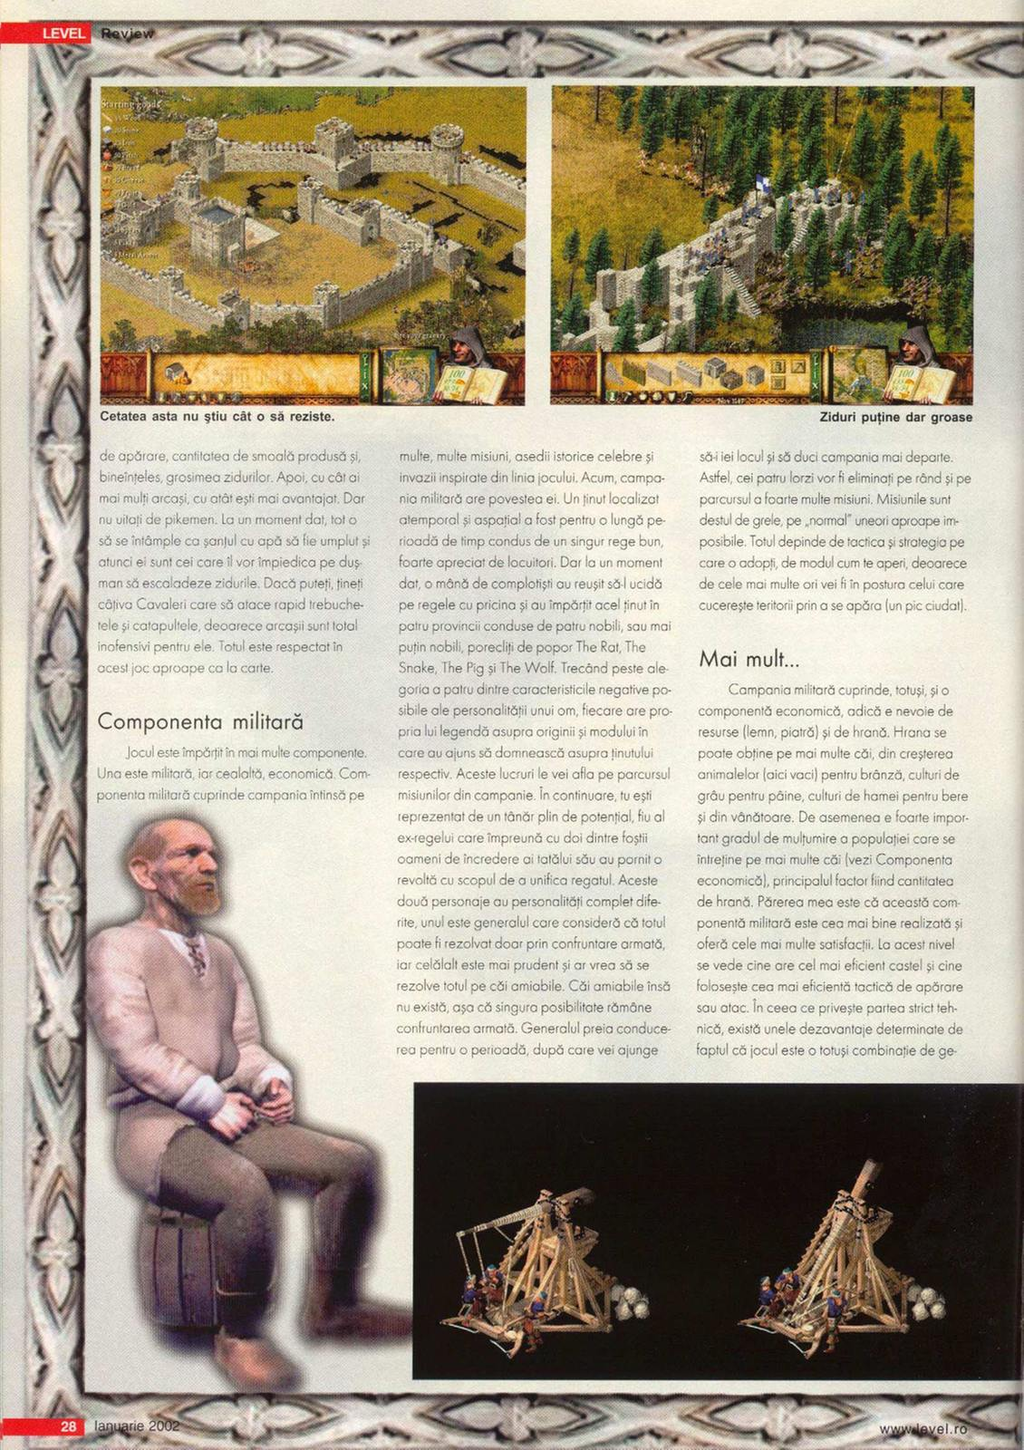 level-52-jan-2002-page-28